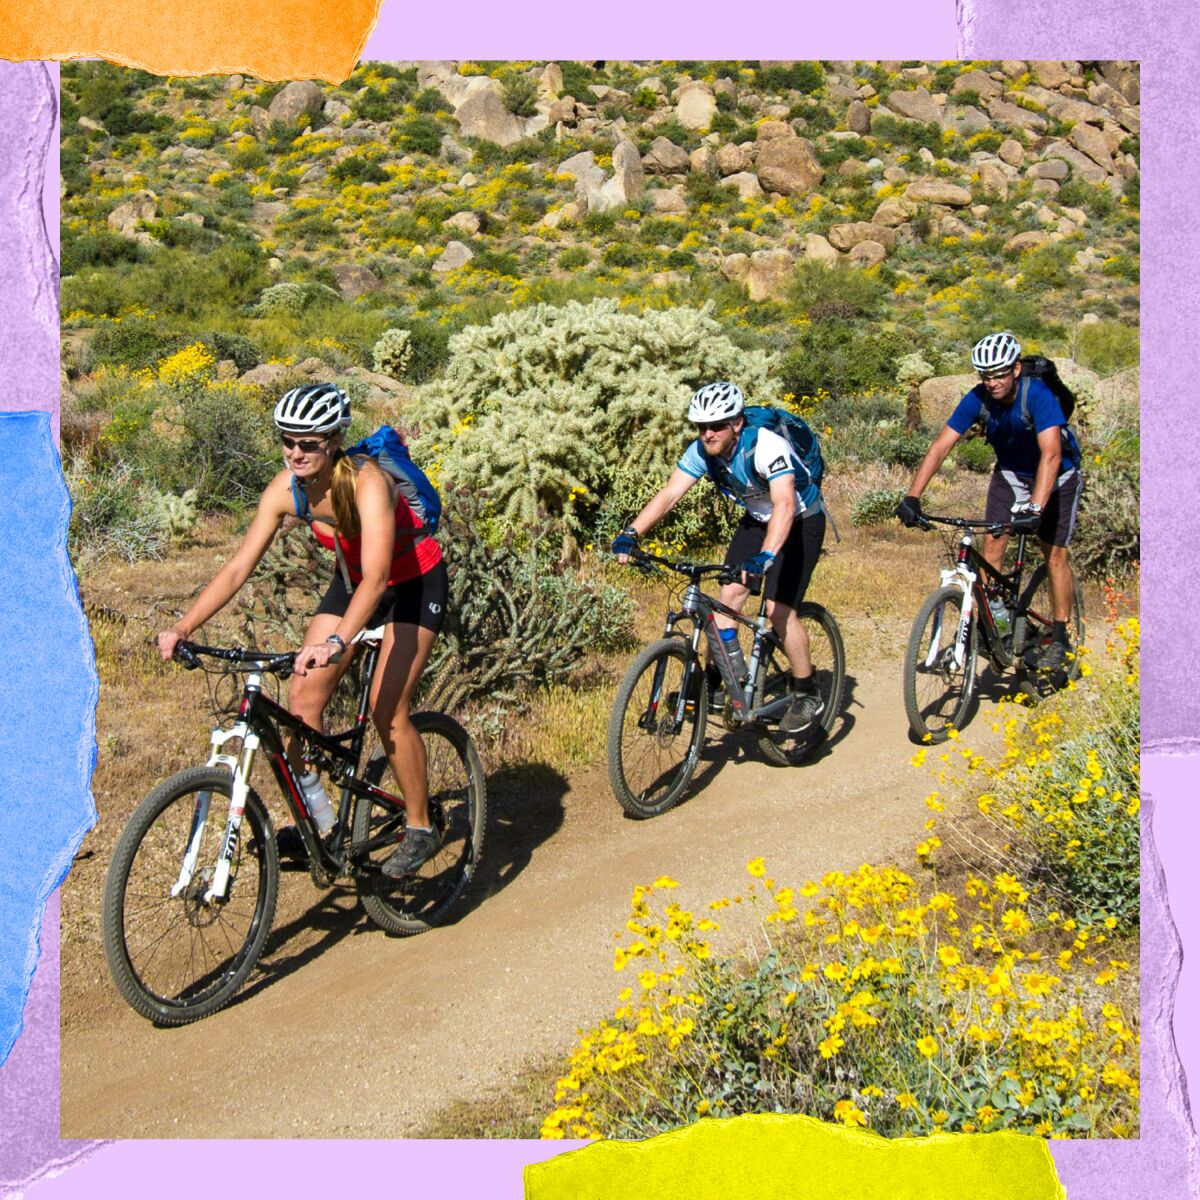 Three people on mountain bikes riding on a path beside bushes, rocks, and flowers.